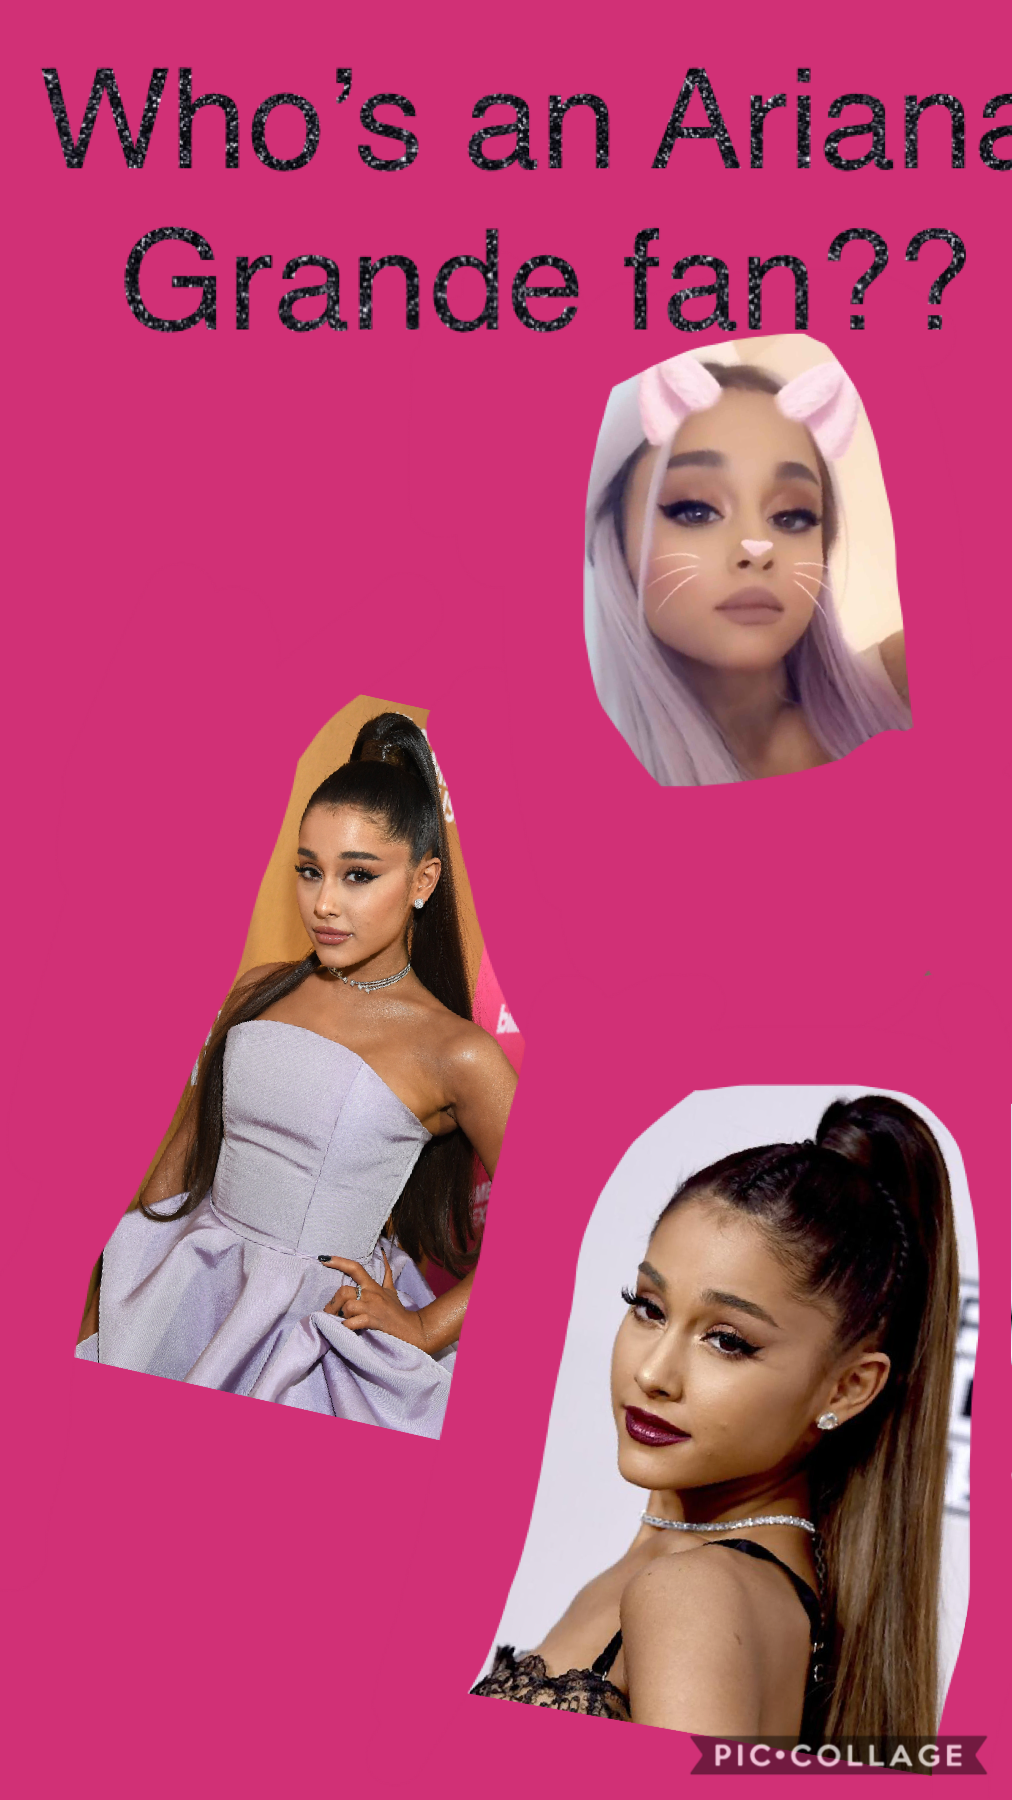 Are you an Ariana Grande fan? Yes or No comment below